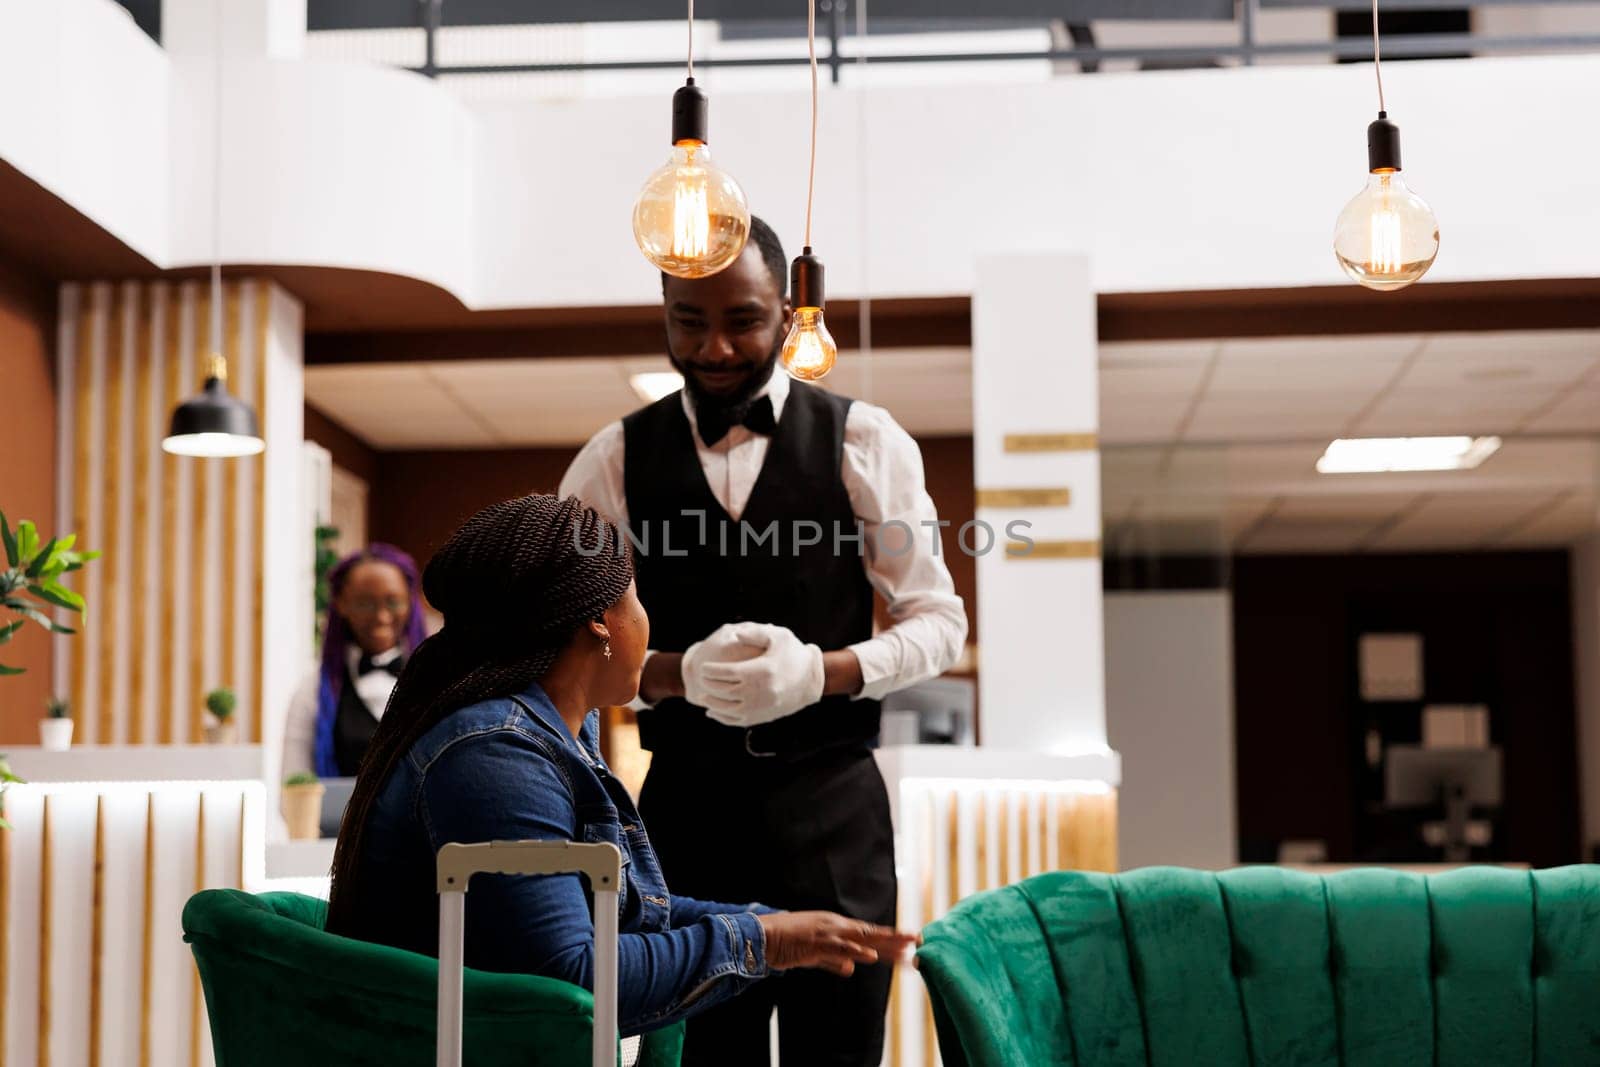 Hotel bellboy talking with guest by DCStudio